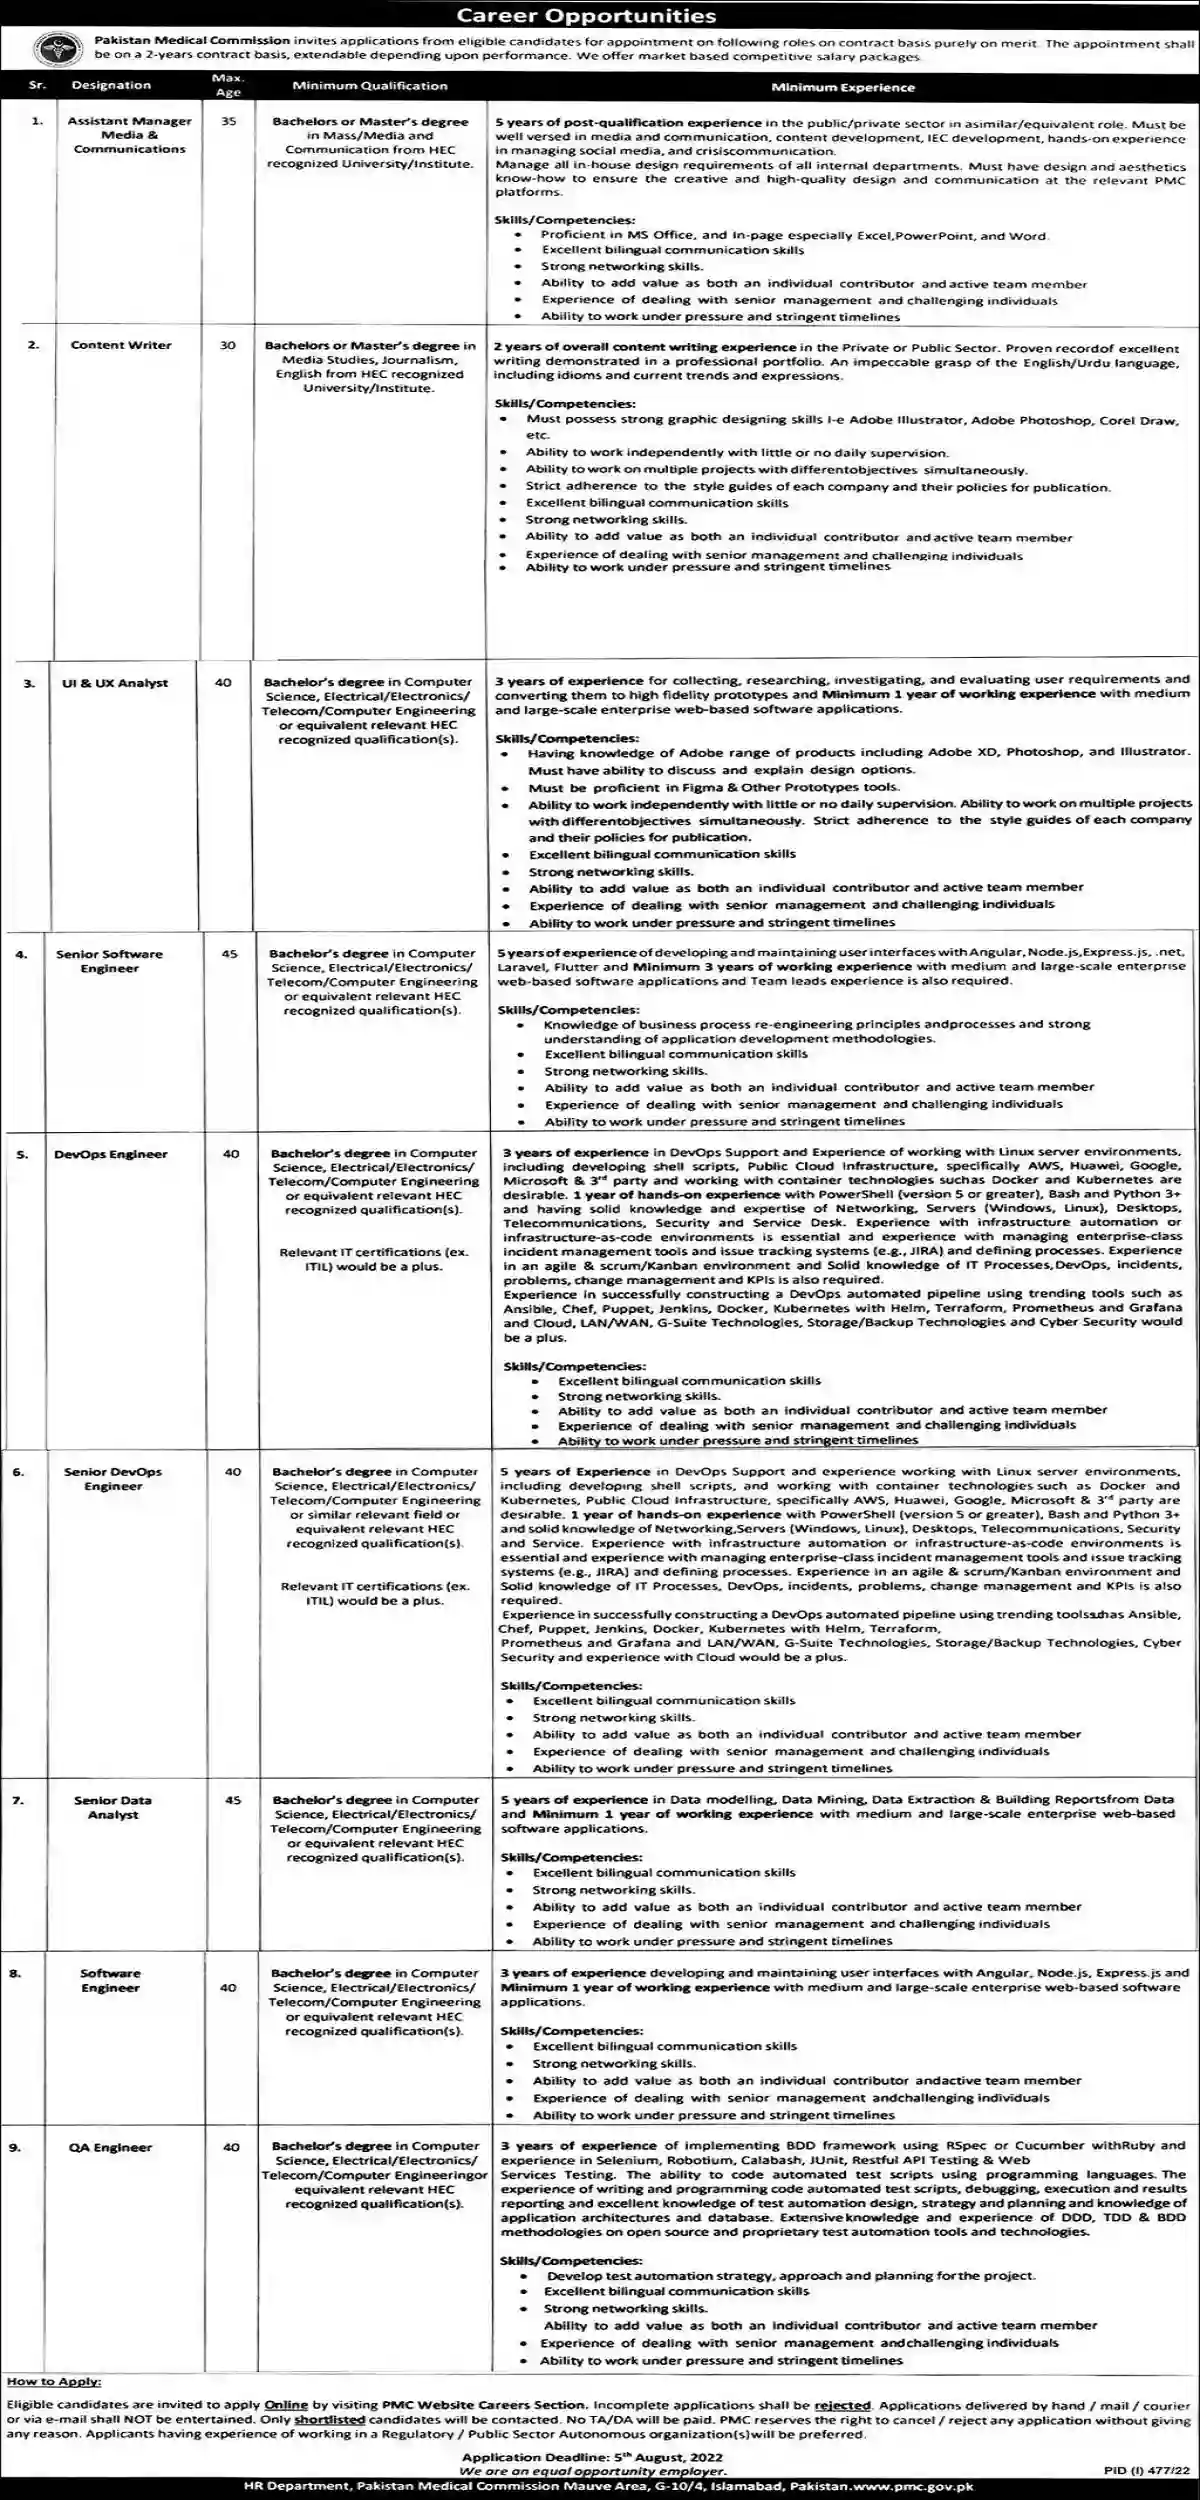 Pakistan Medical Commission Jobs 2022 Apply Online PMC Careers